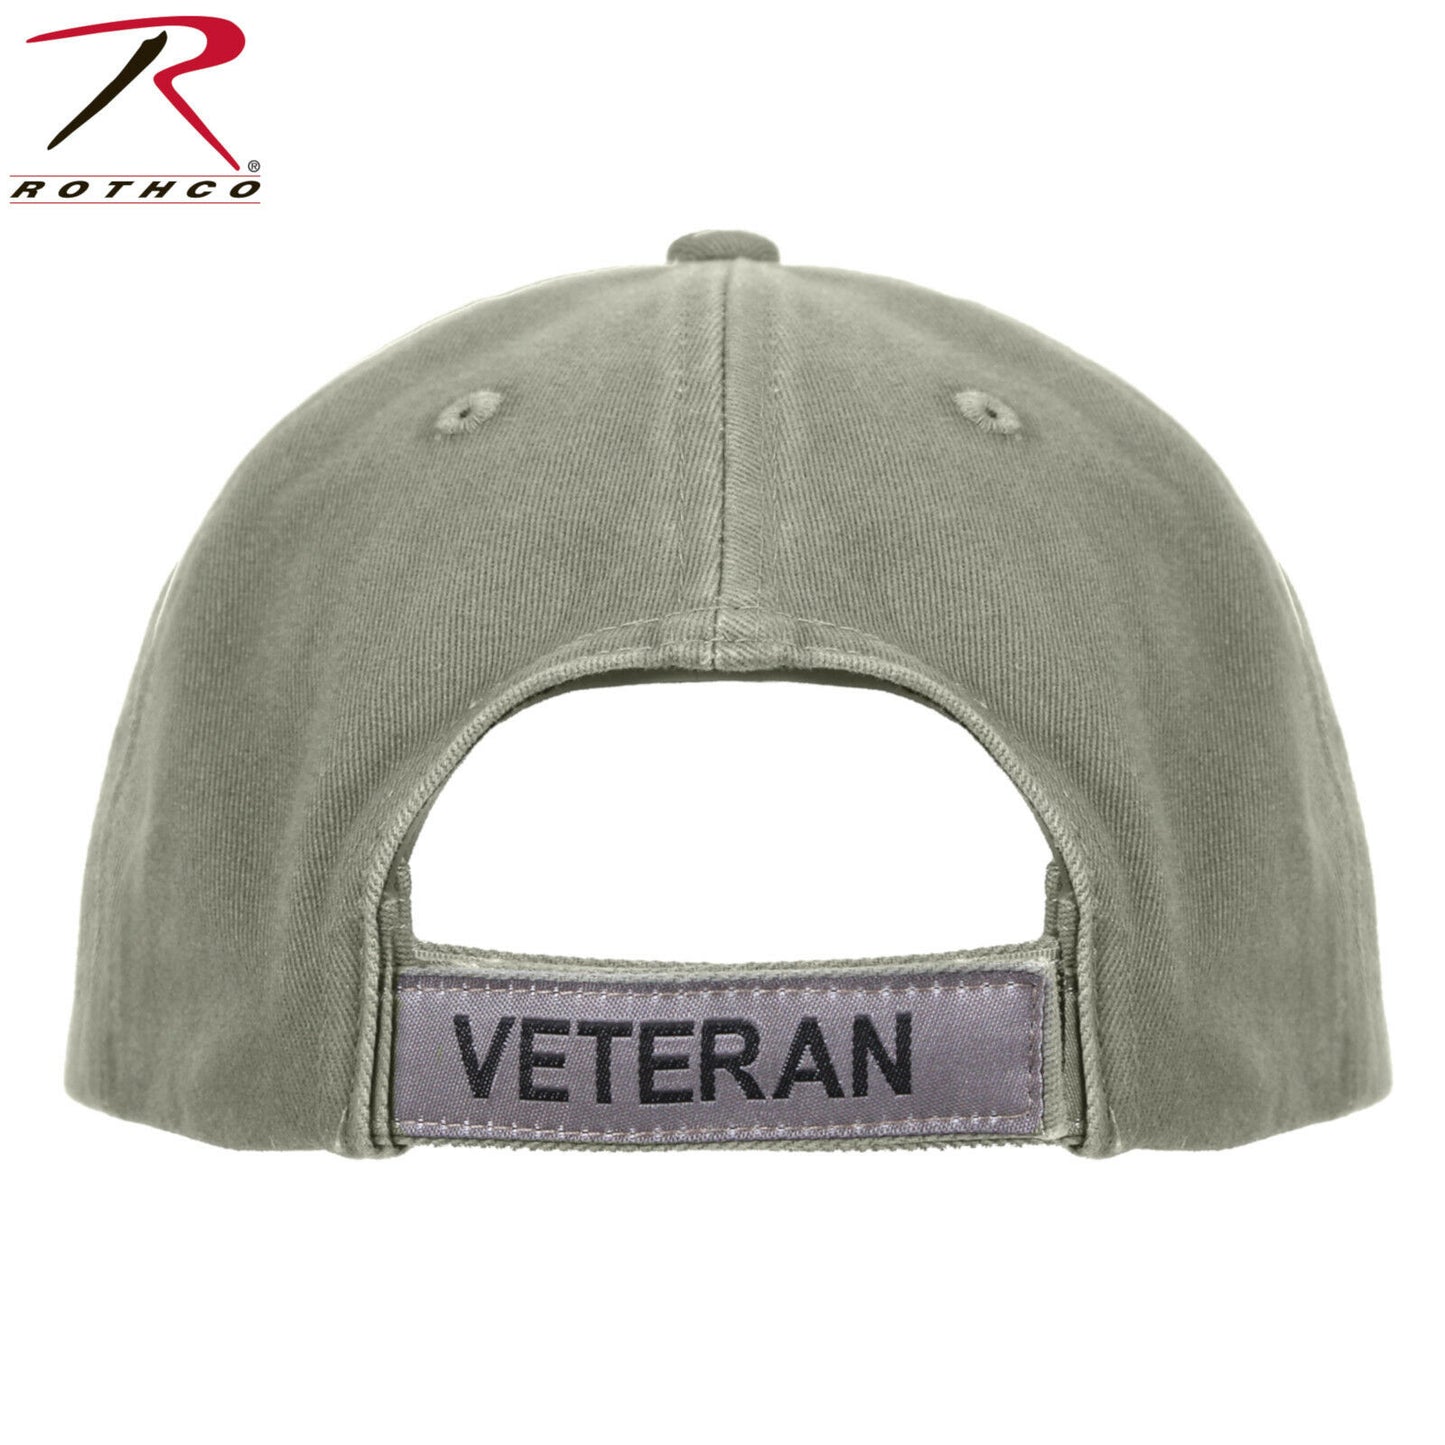 Rothco Vintage Olive Drab Veteran Mid-Low Profile Cap With Embroidered U.S. Flag